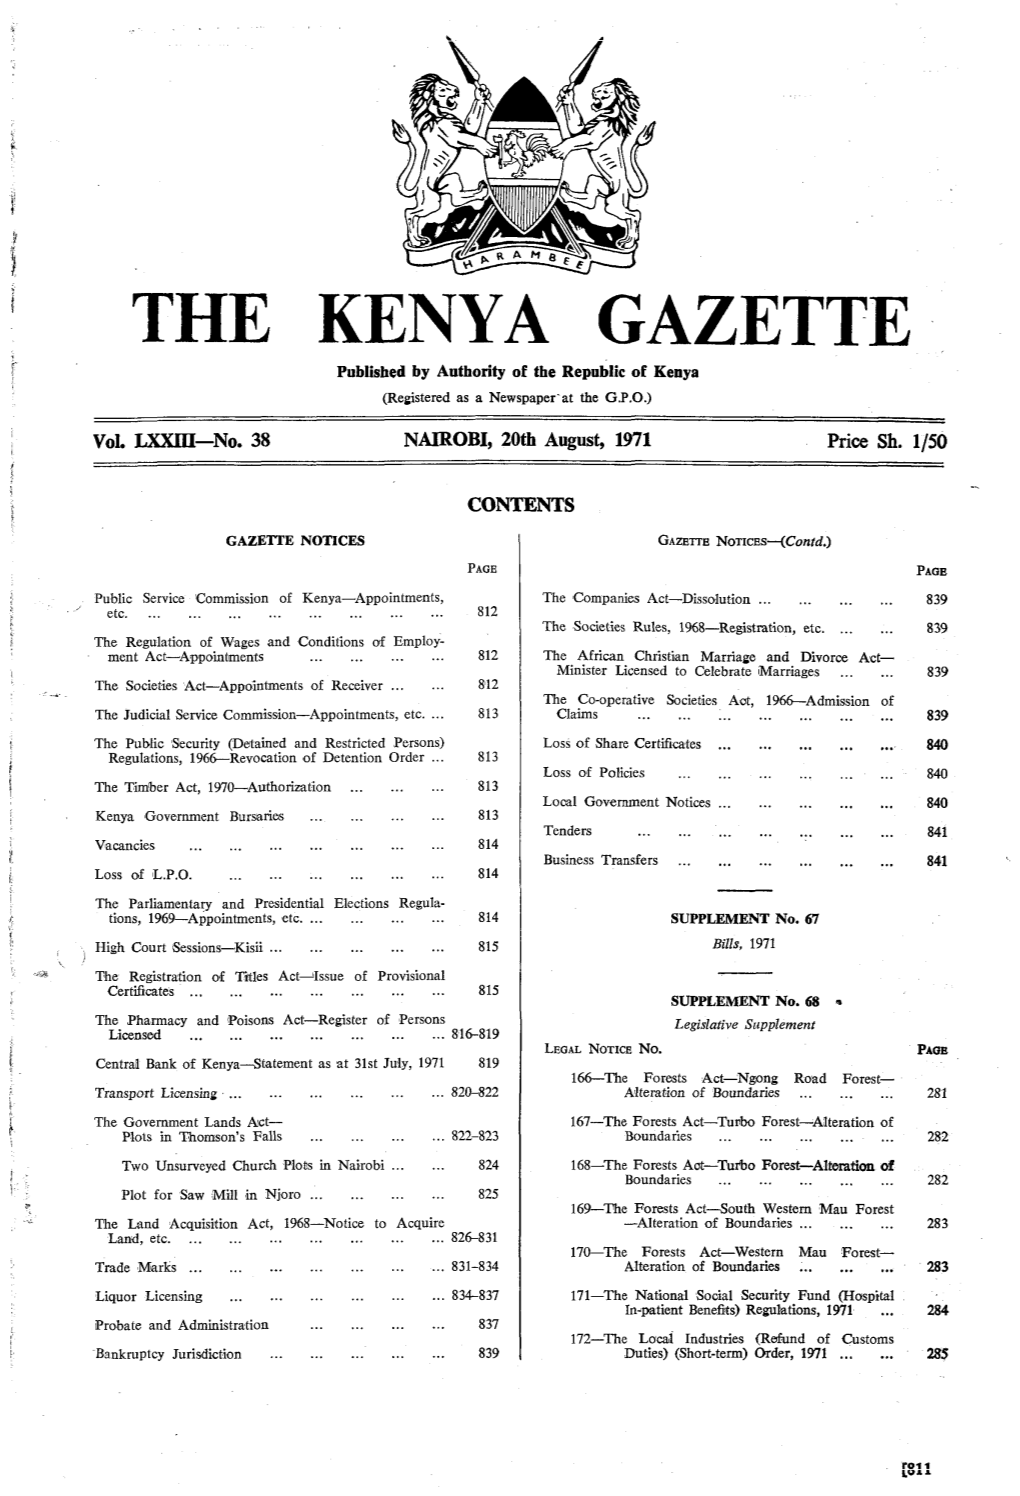 THE KENYA GAZETTE F Published by Authority of the Republic of Kenya (Registered As a Newspaper at the G.P.O.)